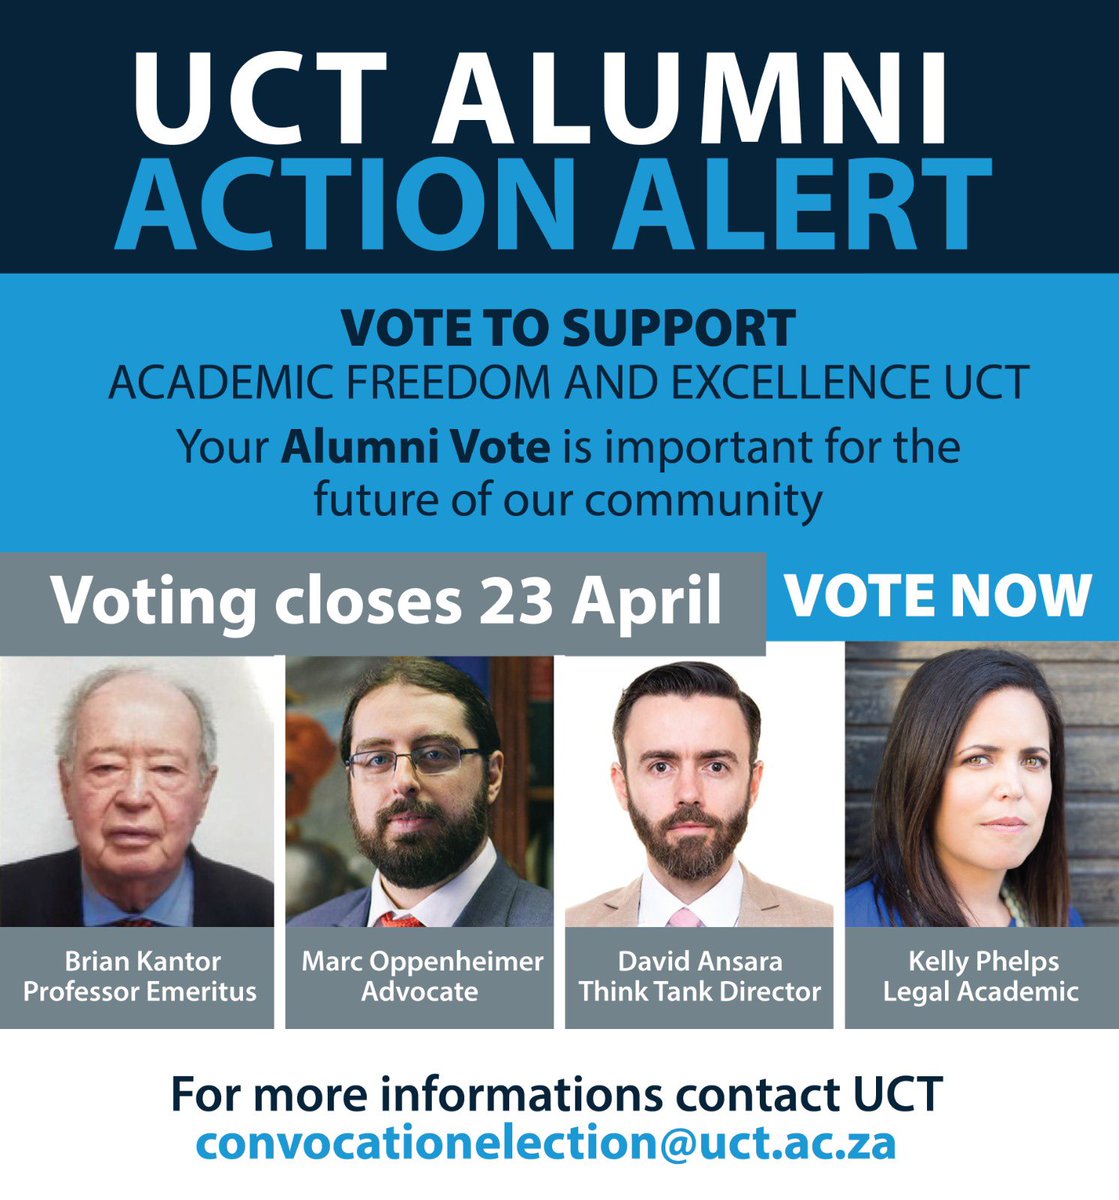 Elections to UCT’s Council are in progress.

You can vote until 23 April 2024. Request a ballot by emailing convocationelection@uct.ac.za

I know Marc and David well and strongly endorse them.

If Prof Kantor and Kelly Phelps are on the same page - great!

Defeat #schoolcapture